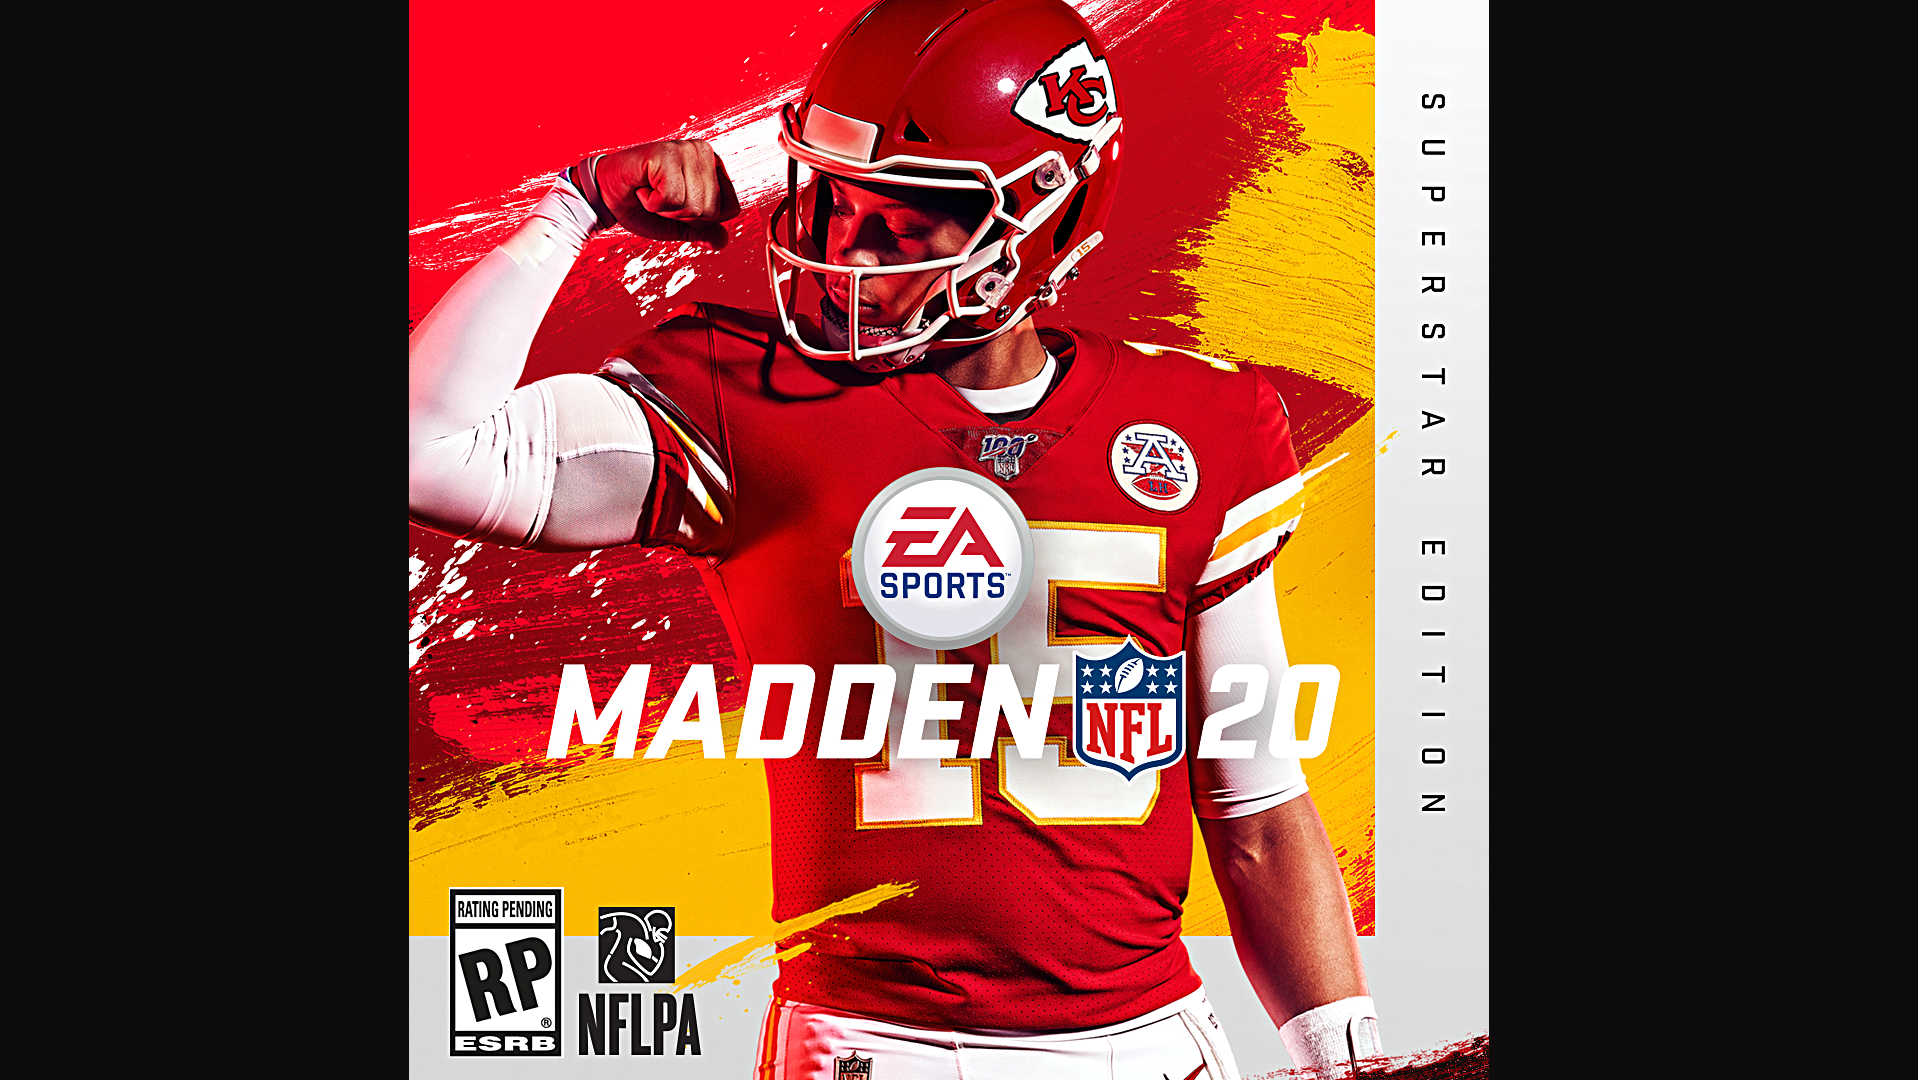 Patrick Mahomes Gets His Video Game Due With Madden Nfl Cover